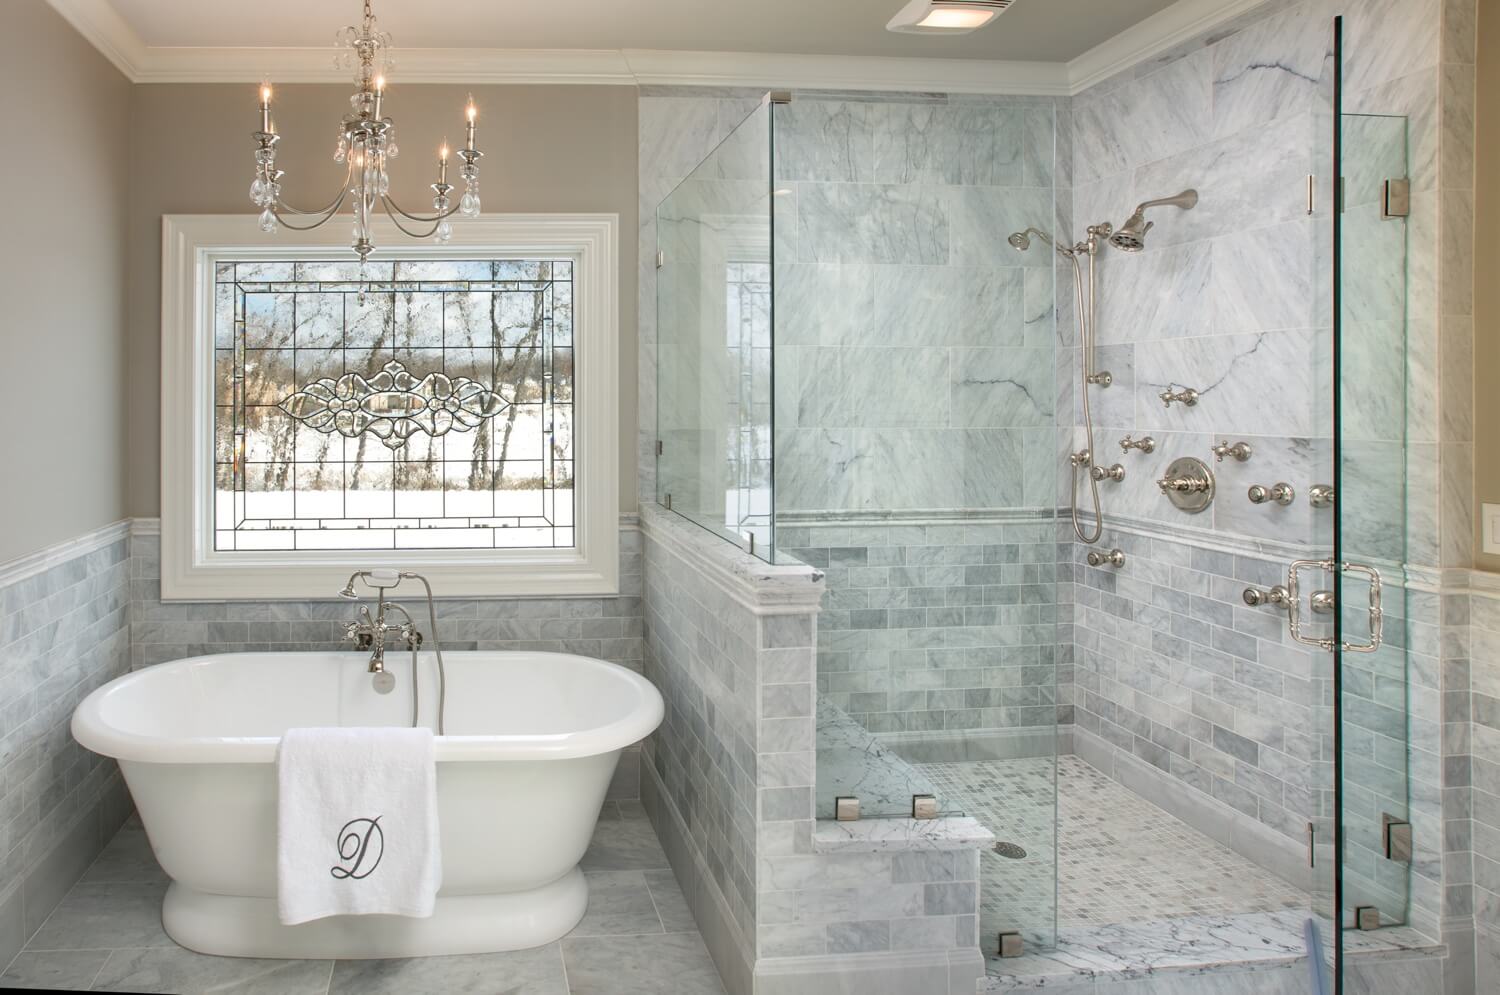 Things You Need to Consider Before You Remodel Your Bathroom